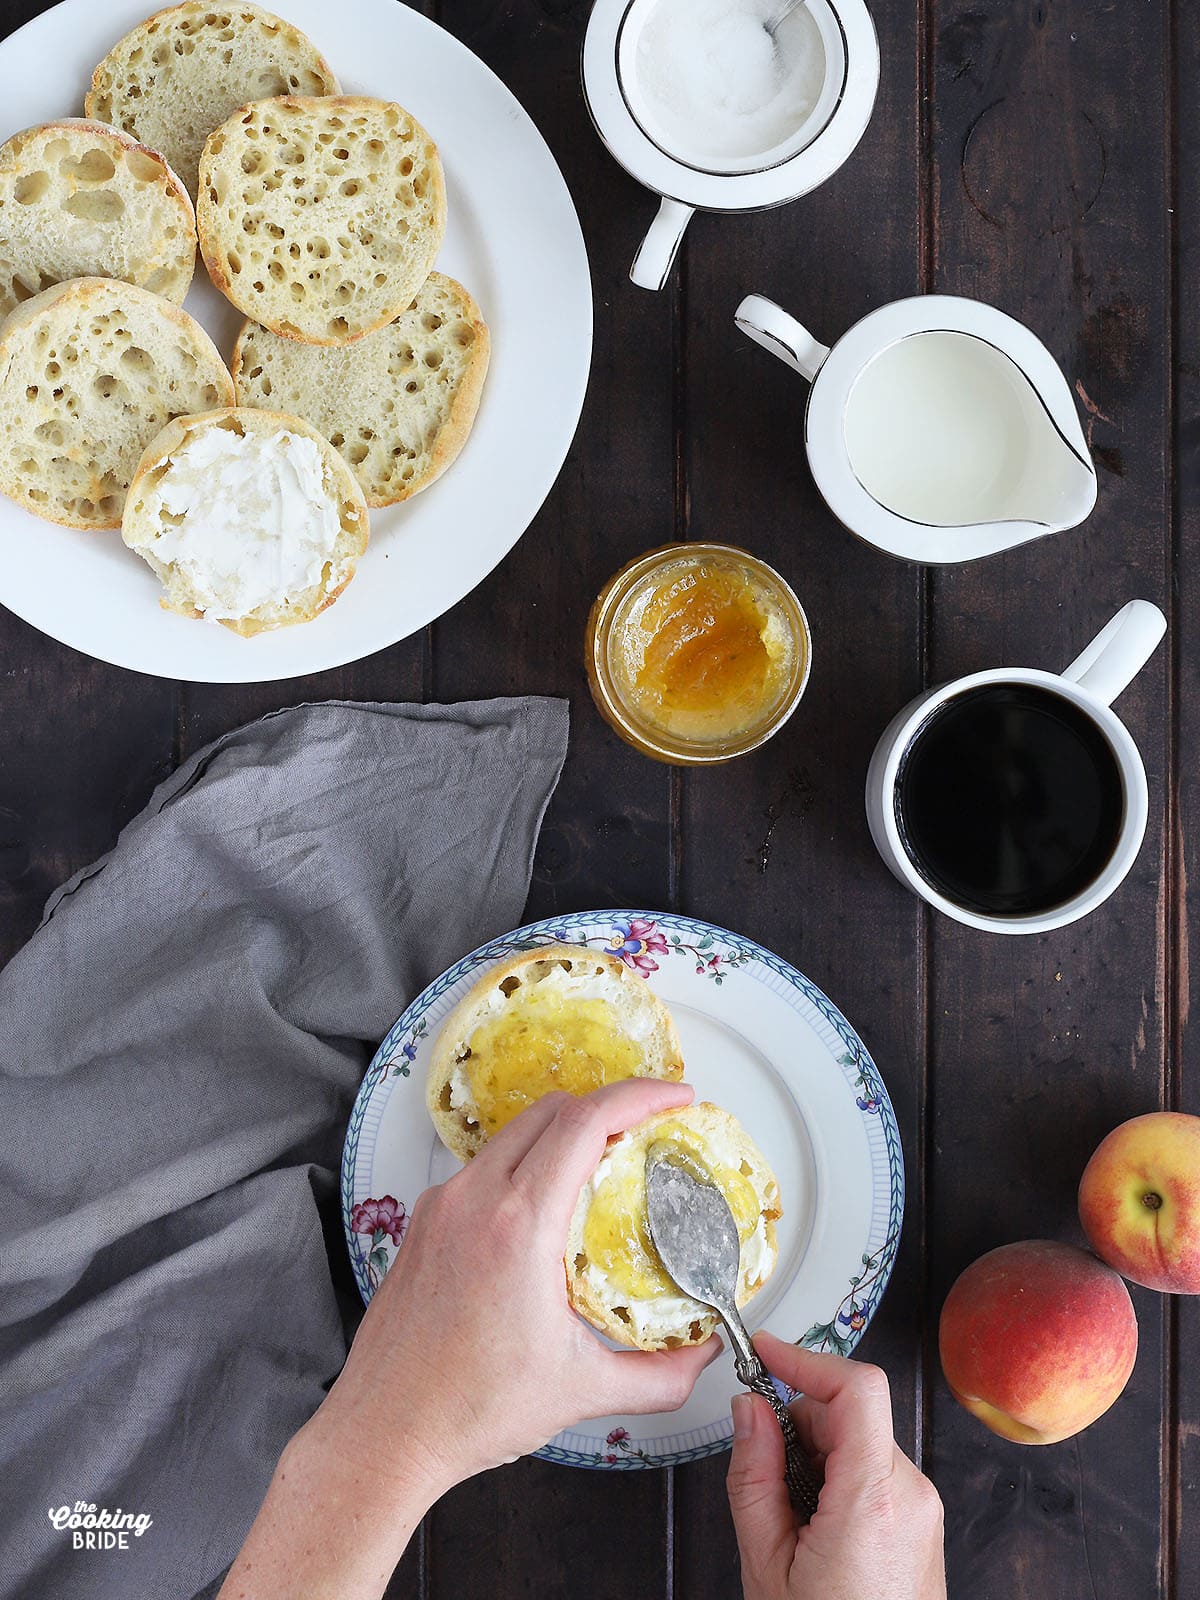 overhead shot of hands spreading peach jam over an English muffin. Plate of English muffins, jam, coffee, peaches, cream and sugar to the side on a dark wooden table.